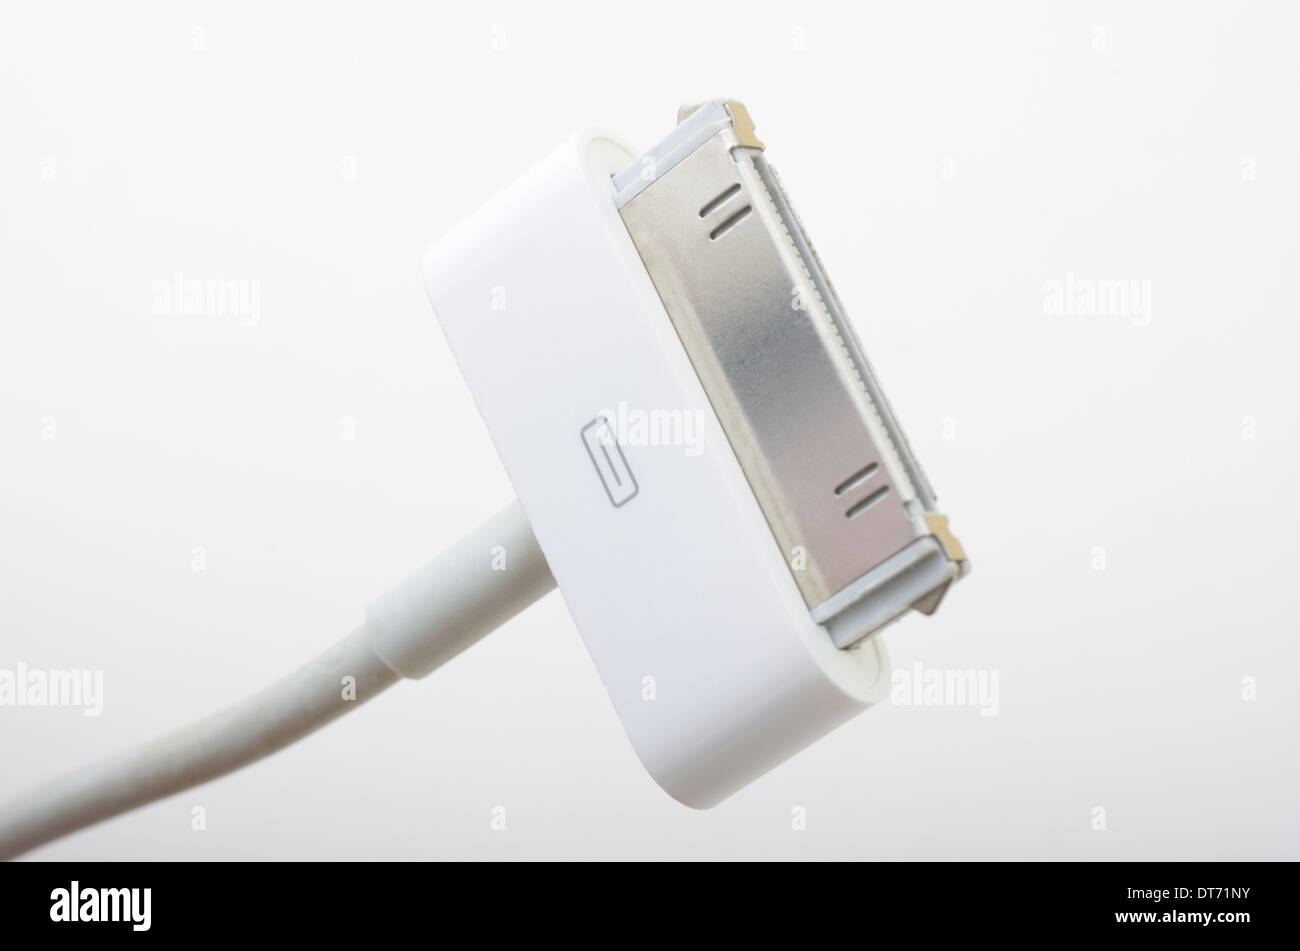 Apple 30-pin dock connector Stock Photo